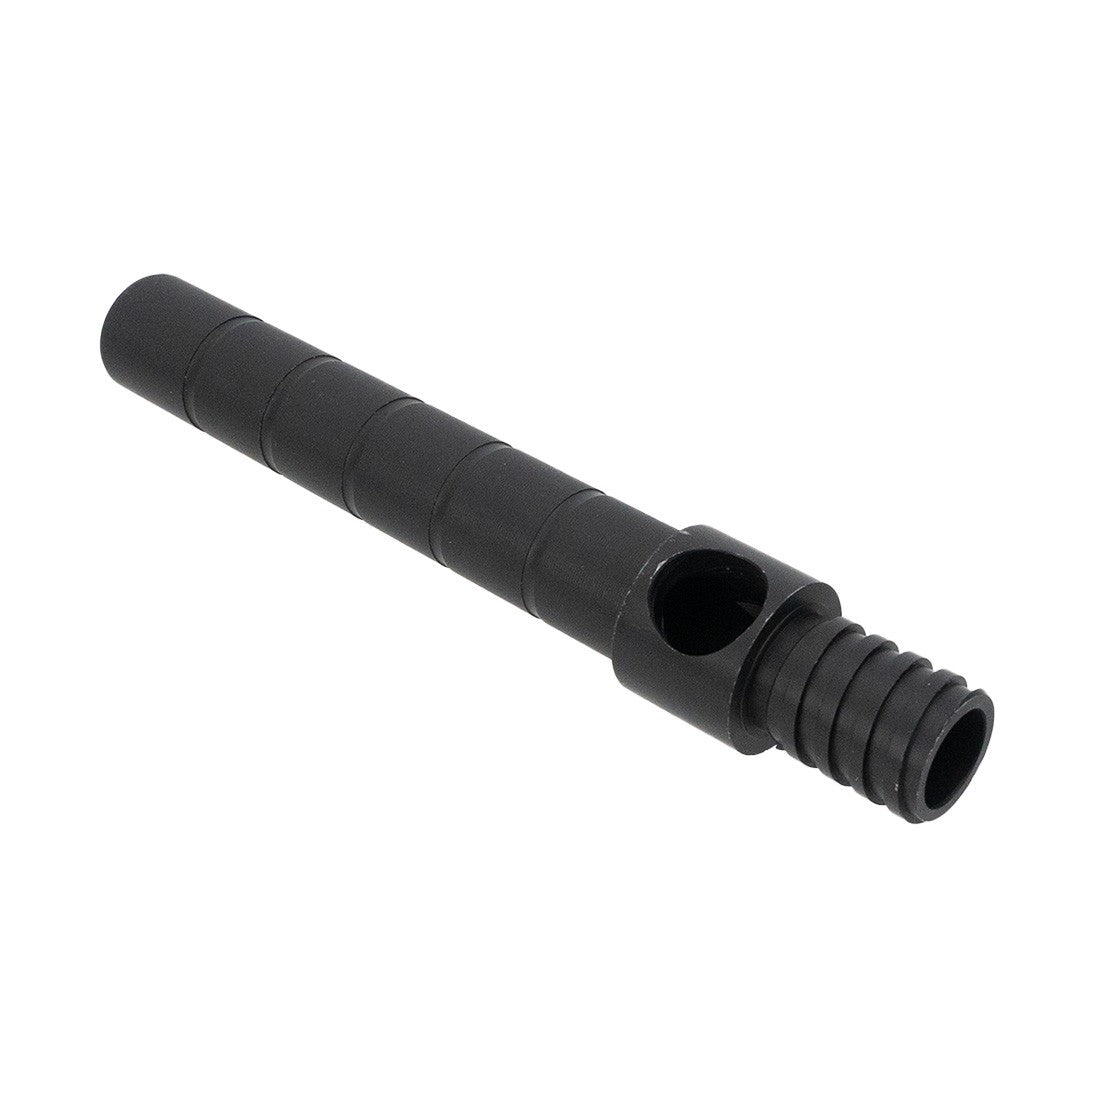 Pure Water Power Aluminum Pole Tip - Acme Top View